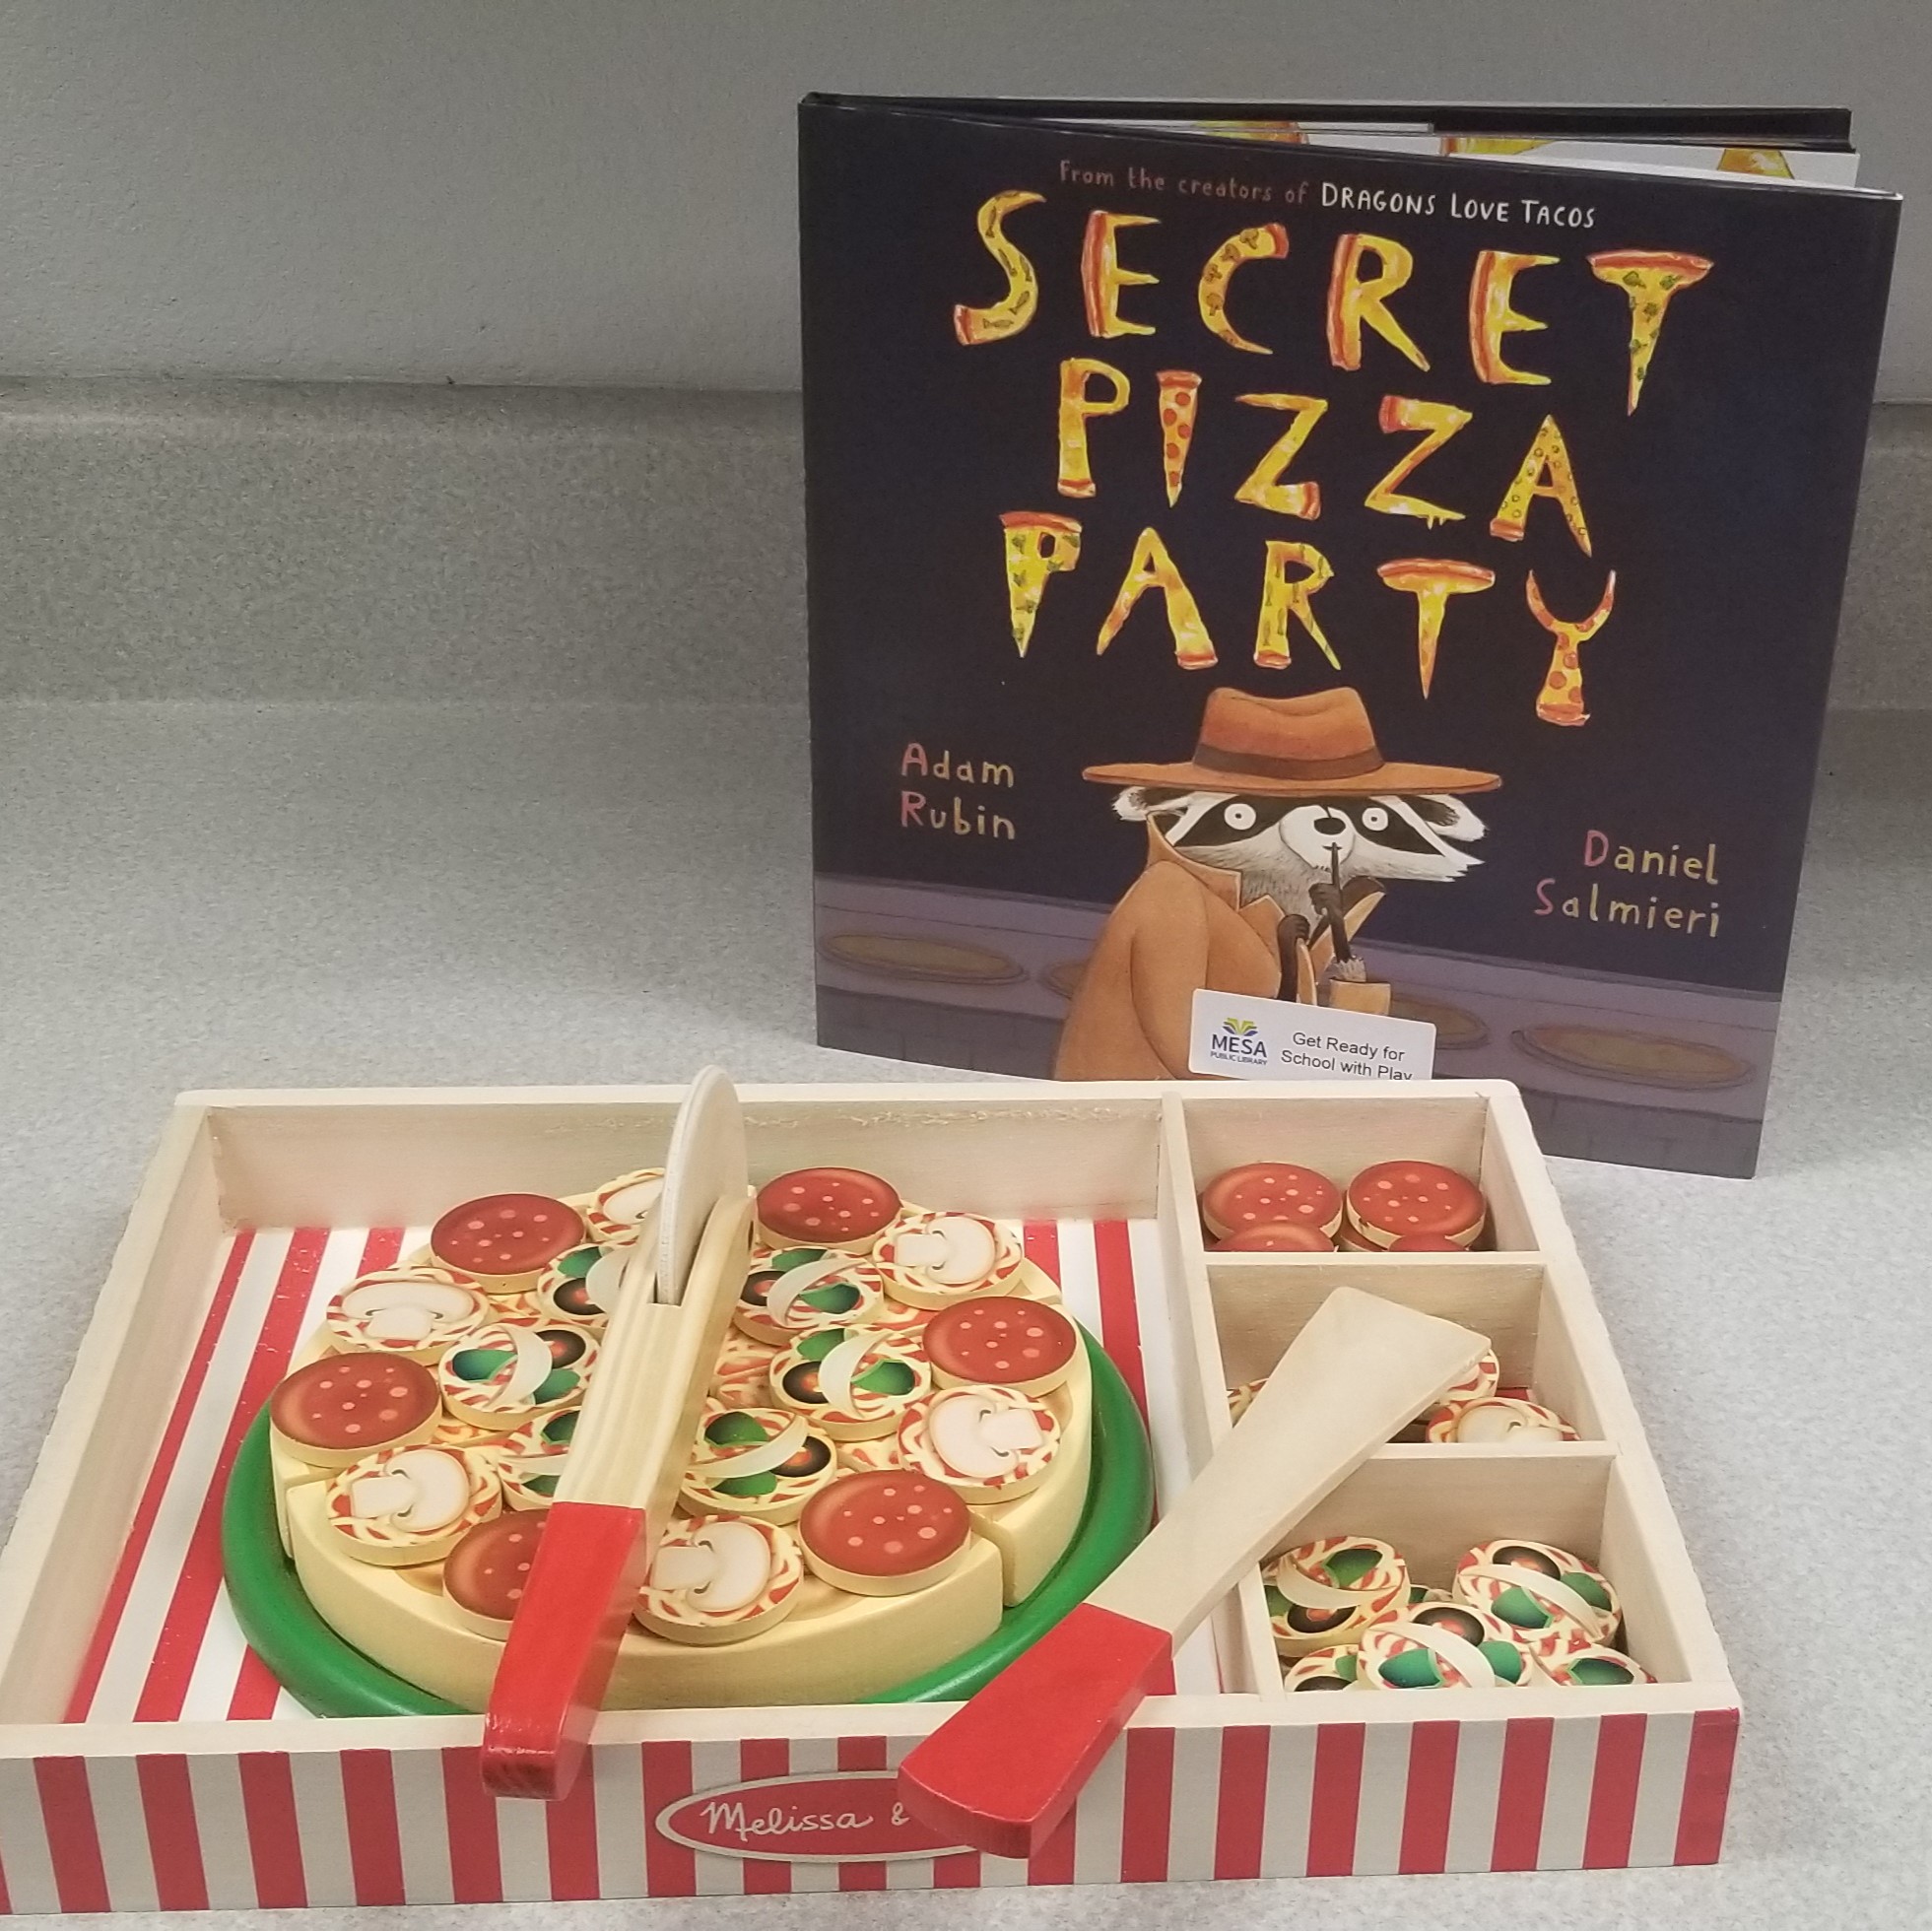 Image of wooden pizza playset and book titled "Secret Pizza Party"